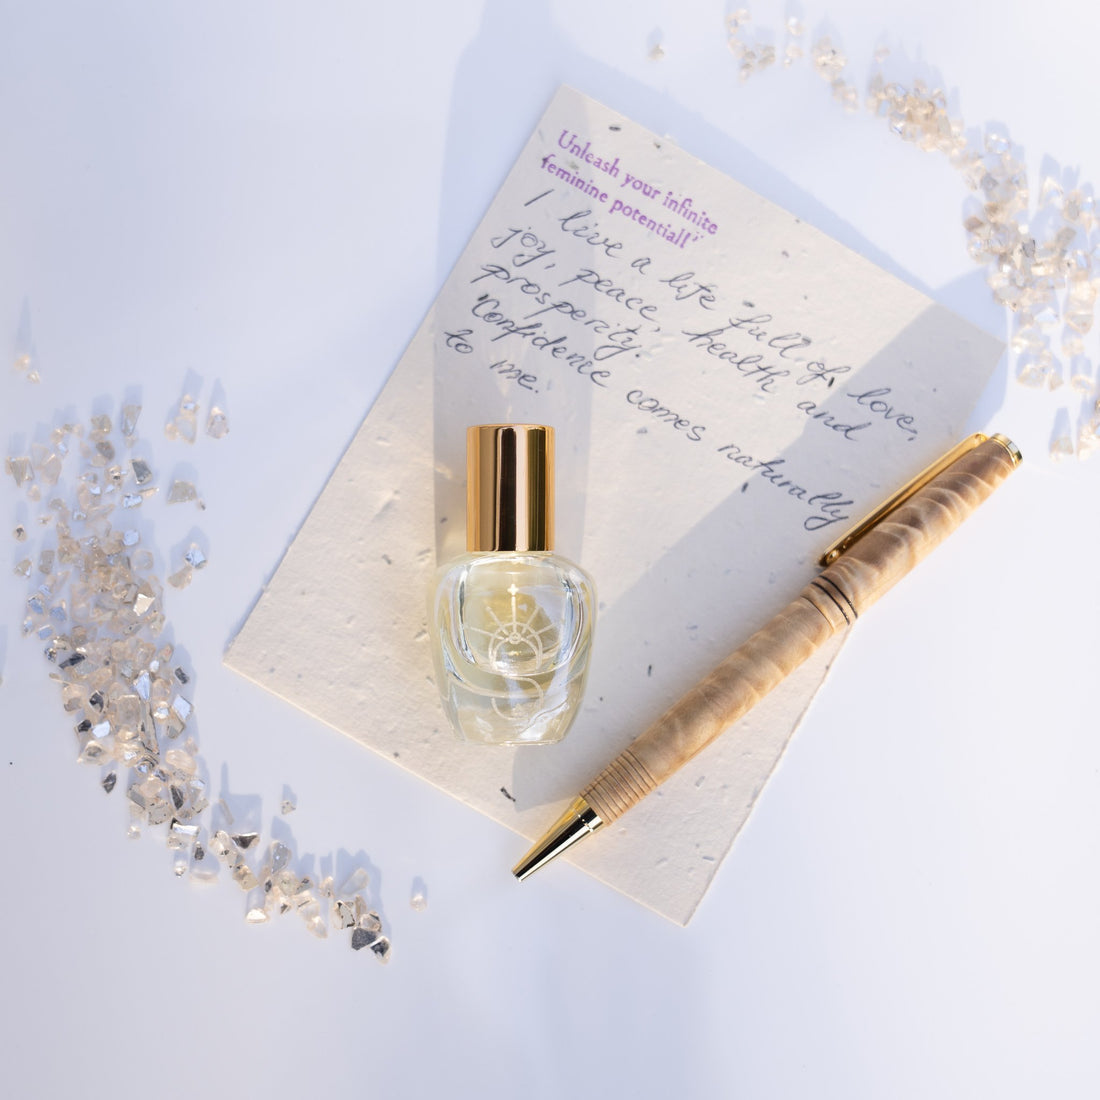 Handmade Perfumes, Innovative Packaging and Self Care - Scentuples